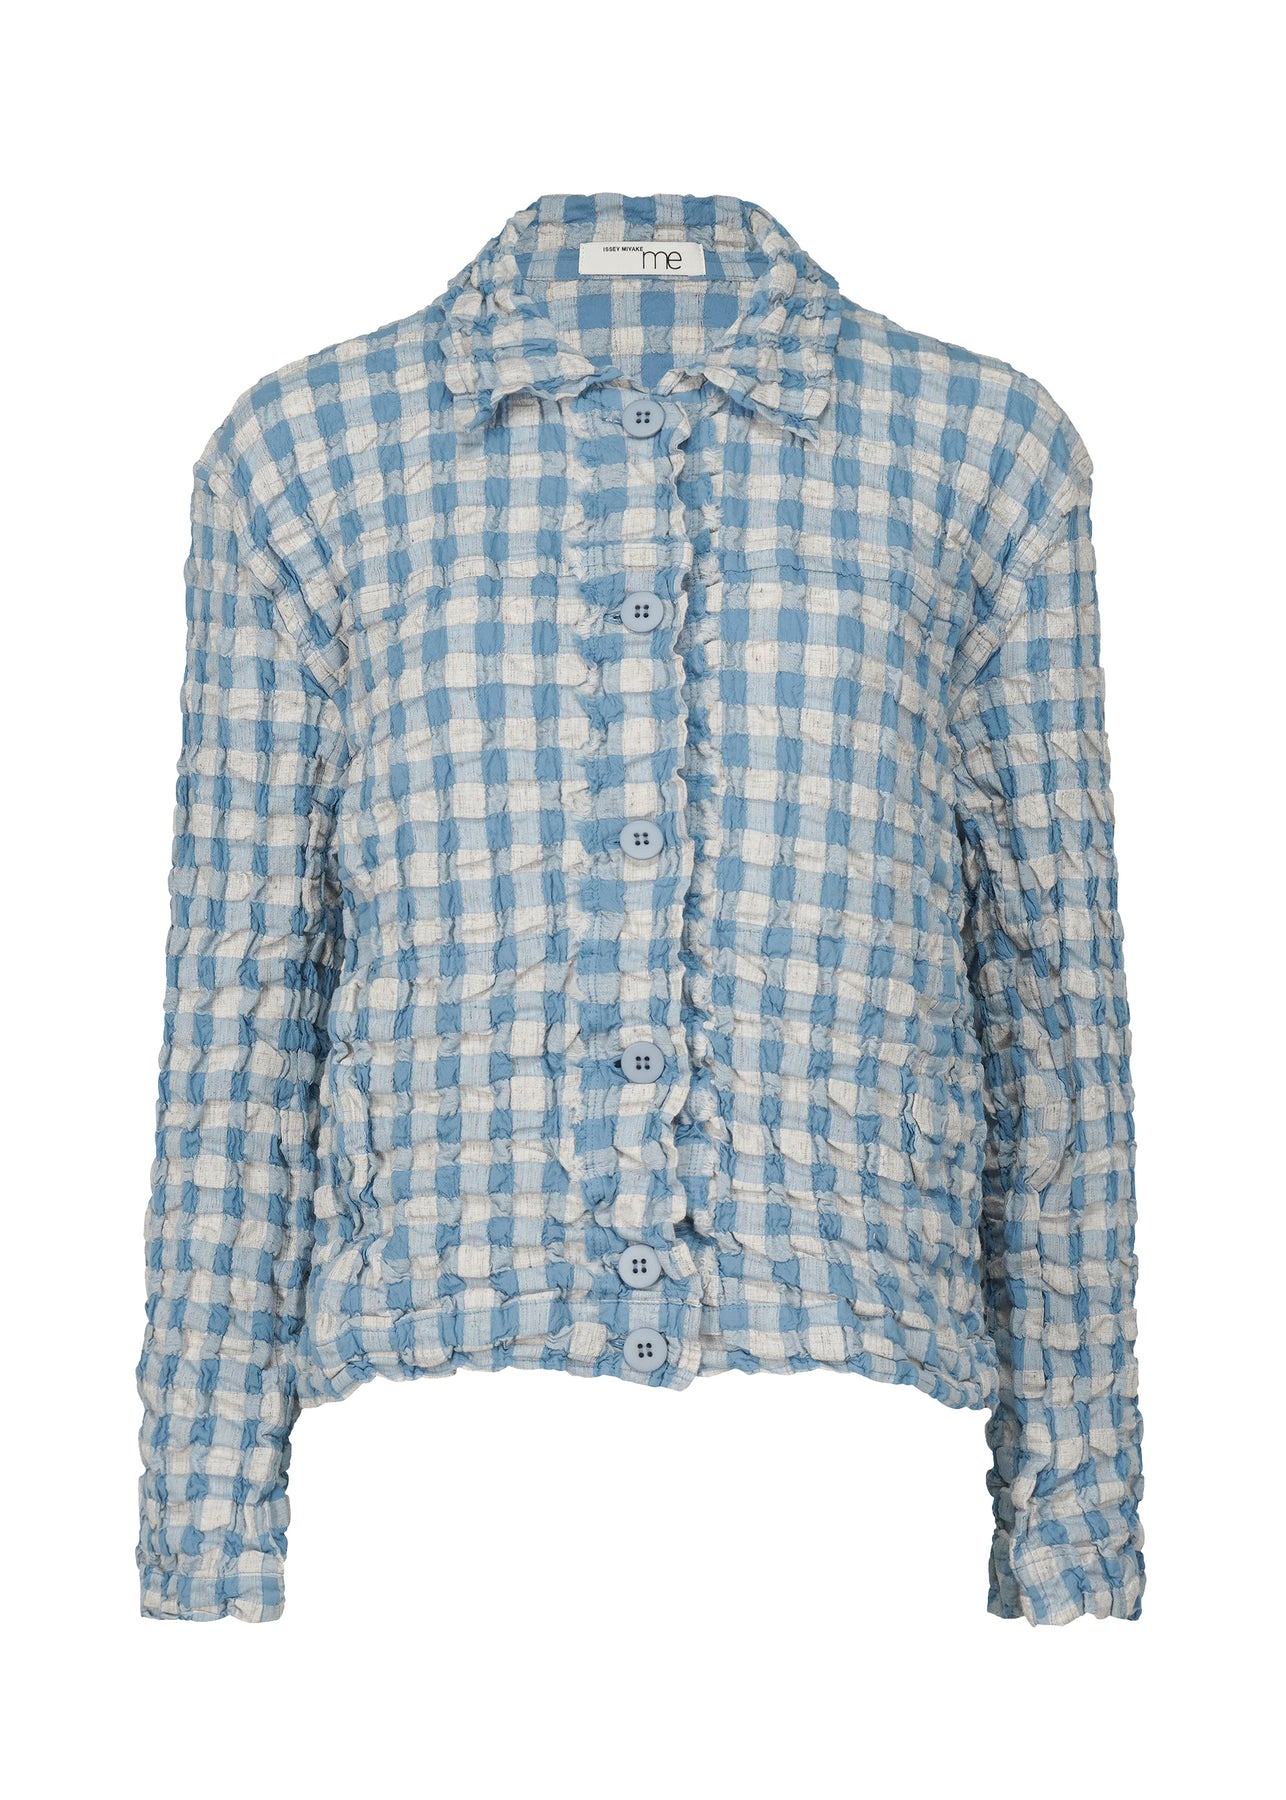 REmeTEX GINGHAM CHECK JACKET | The official ISSEY MIYAKE ONLINE